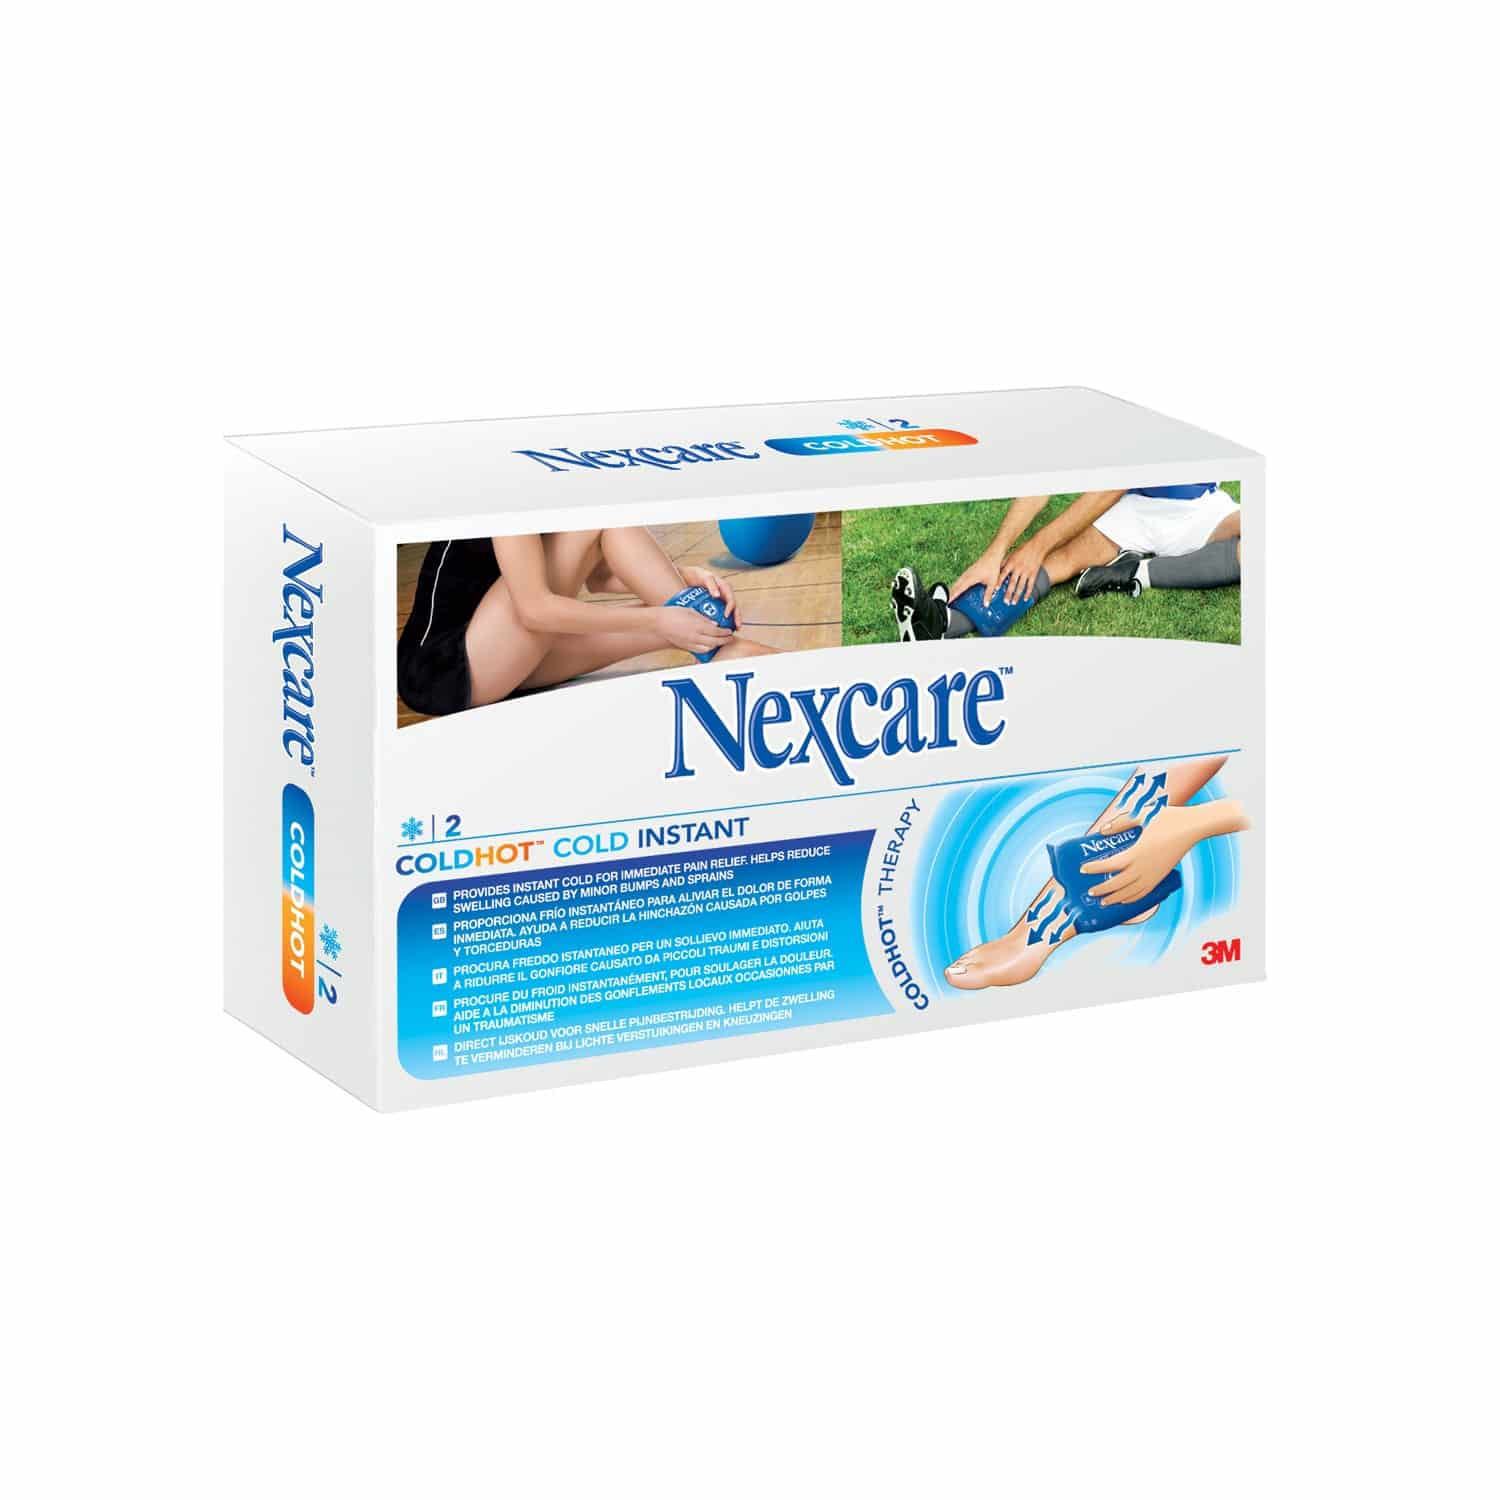 Nexcare Coldhot Cold Instant